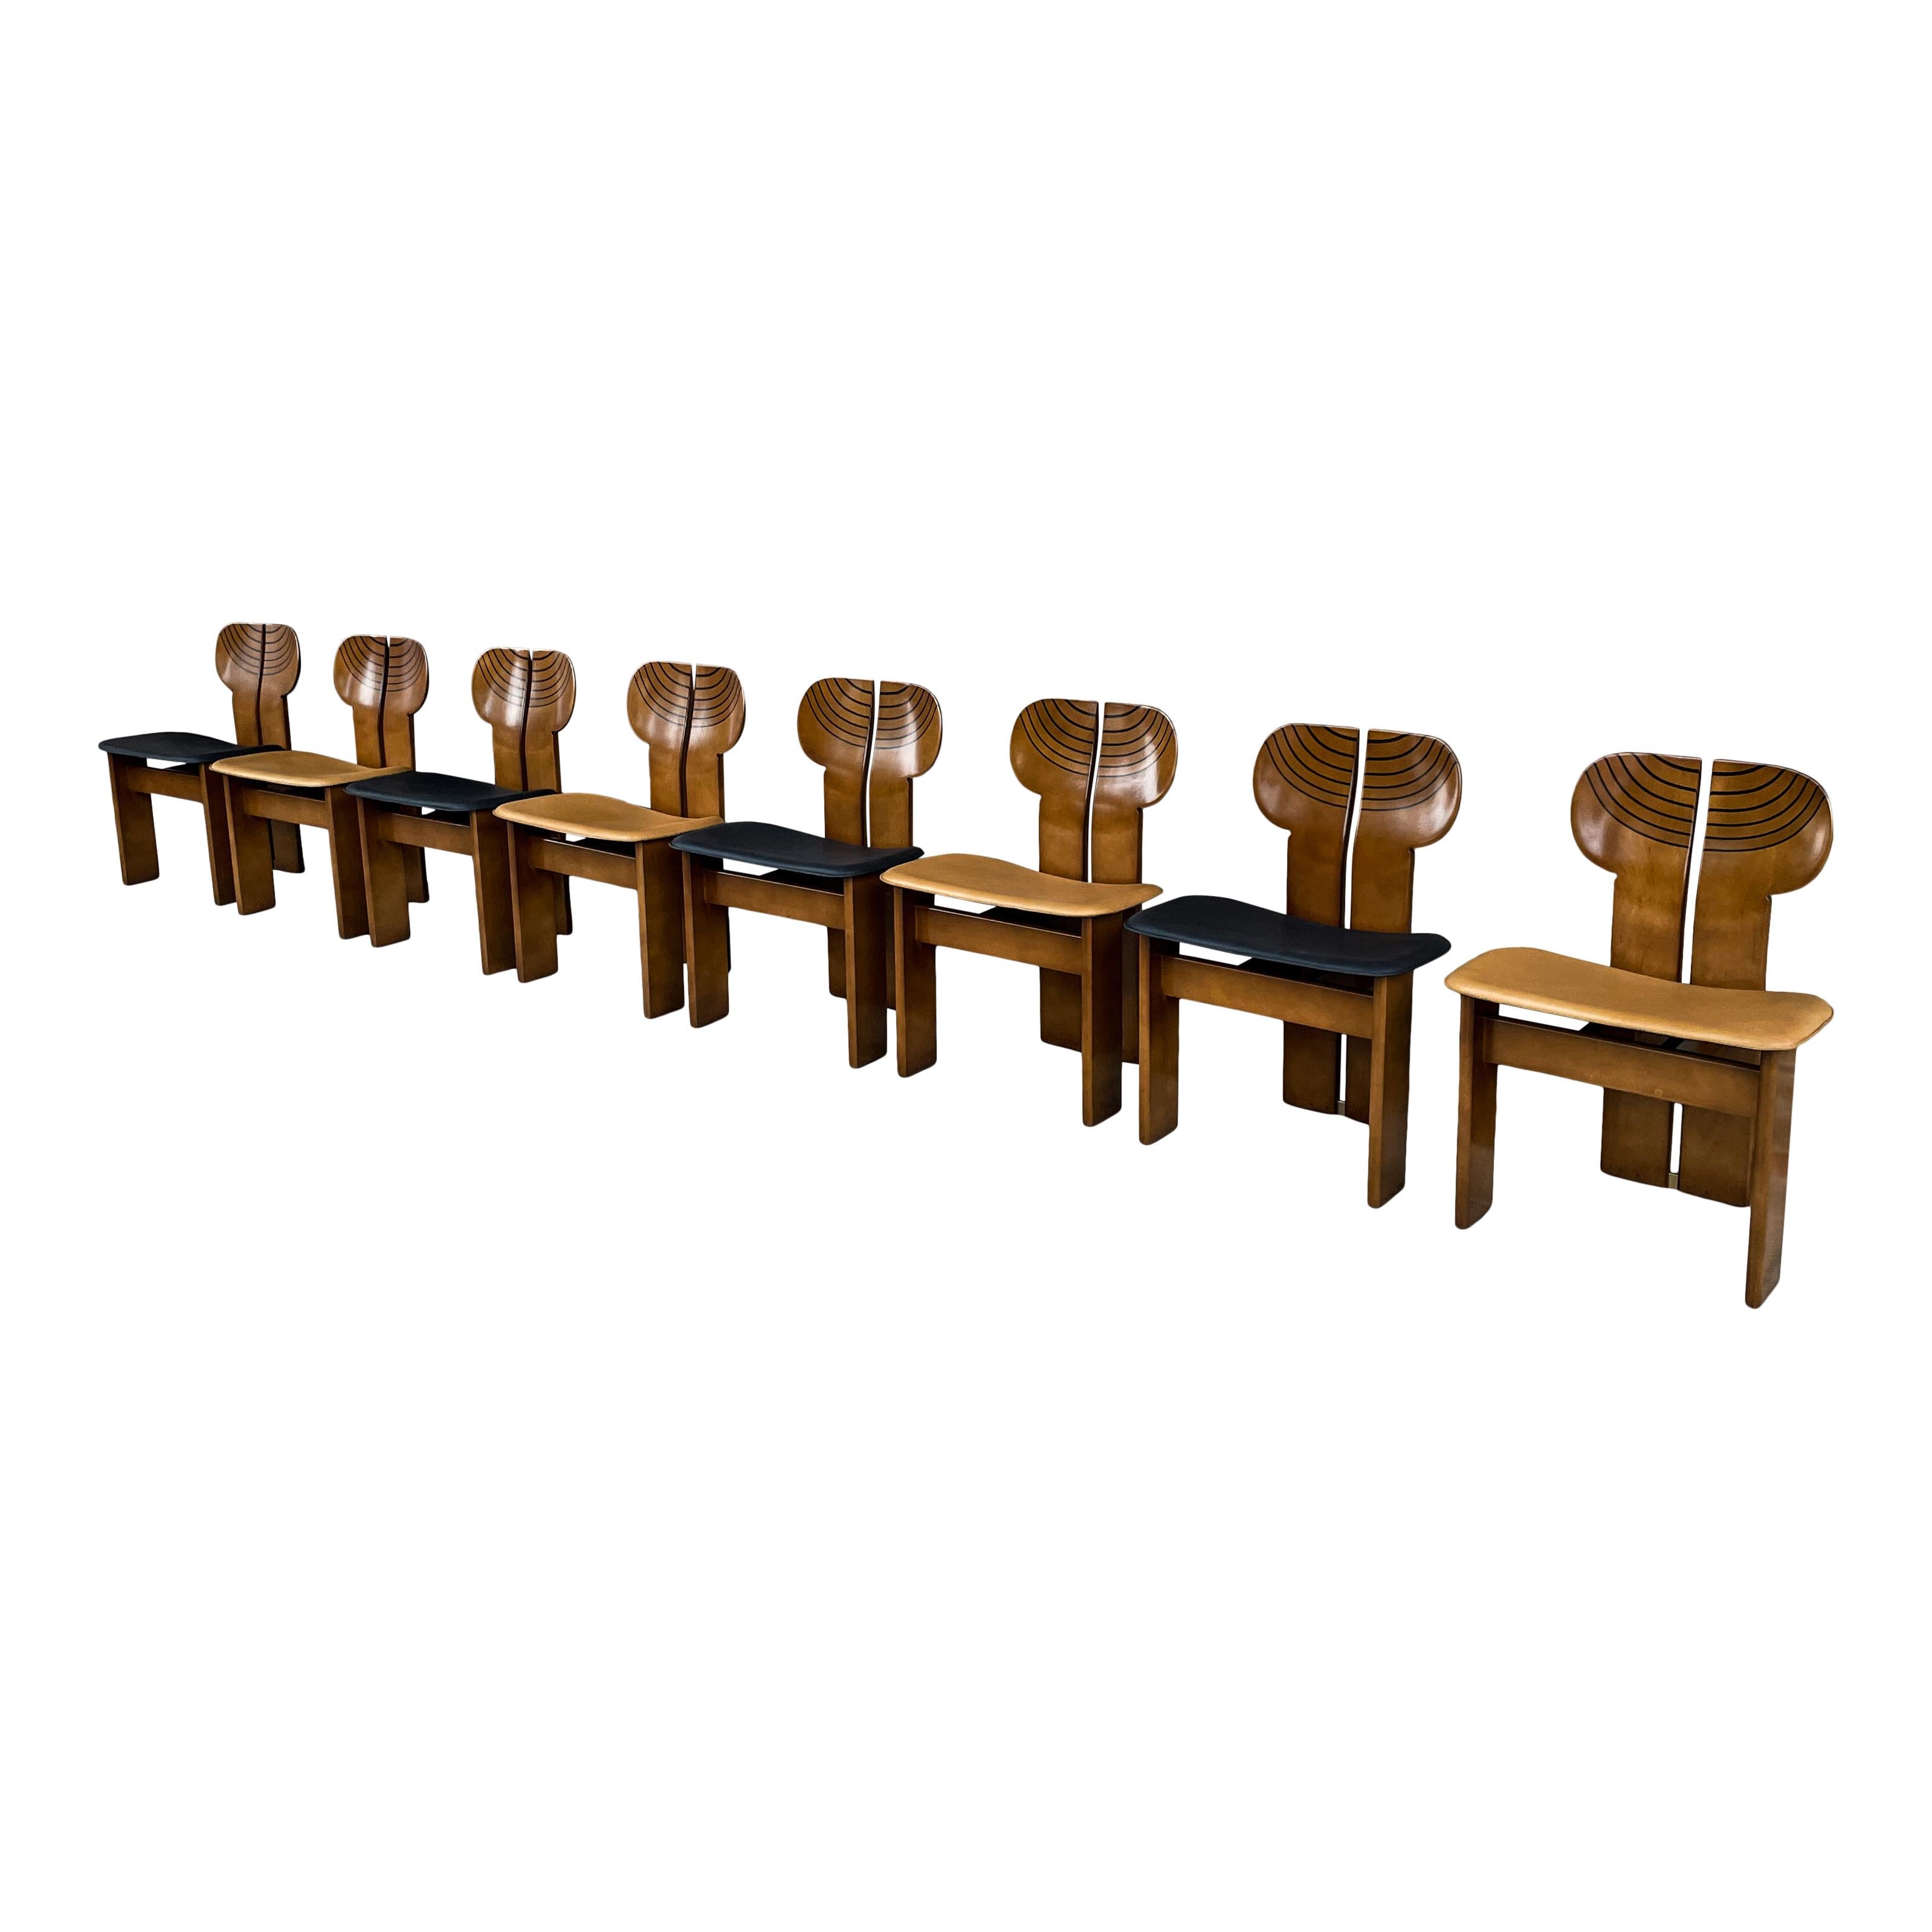 Set of ten Africa dining chairs, designed by Afra and Tobia Scarpa and produced by the Italian manufacturer Maxalto in 1976.
They feature a clear walnut briar structure and a black and cognac leather seat.
Fully restored in Italy.

The main